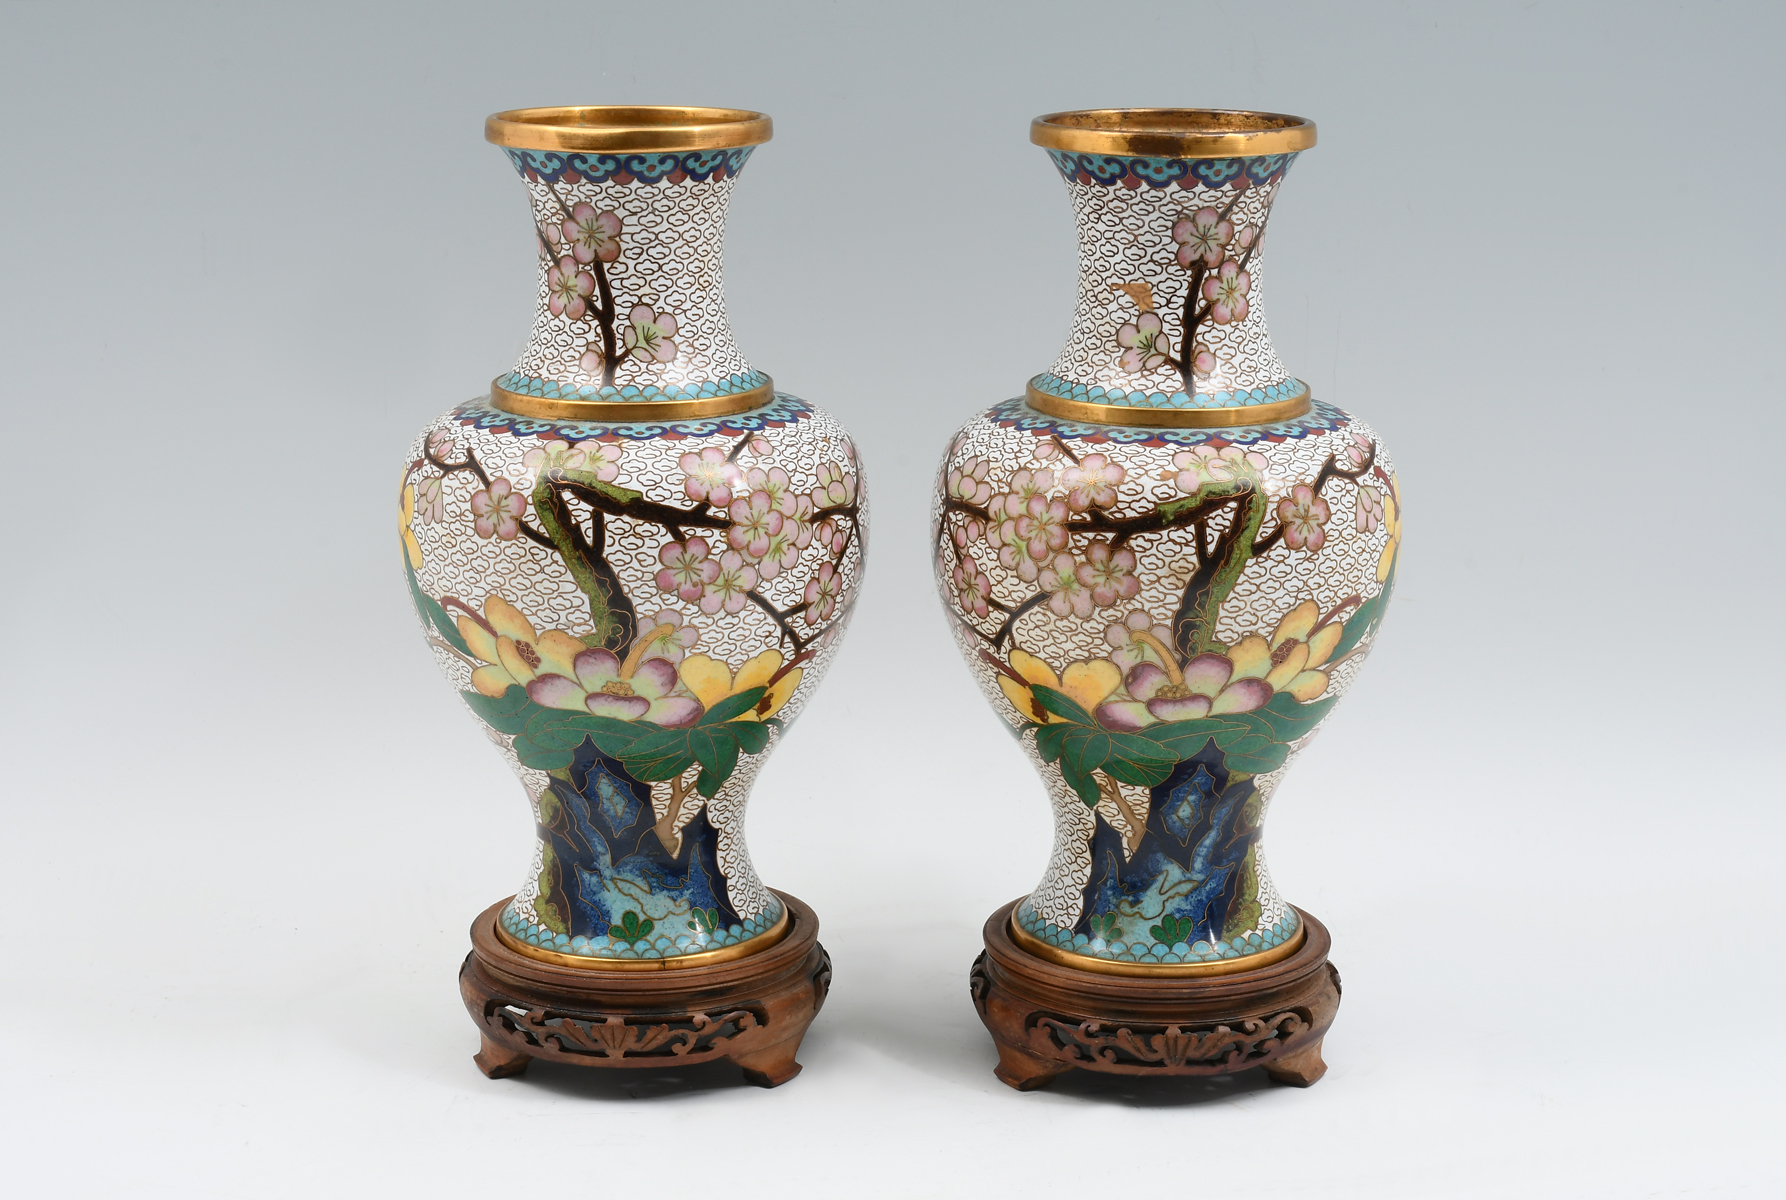 PAIR OF CHINESE CLOISONNE VASES: